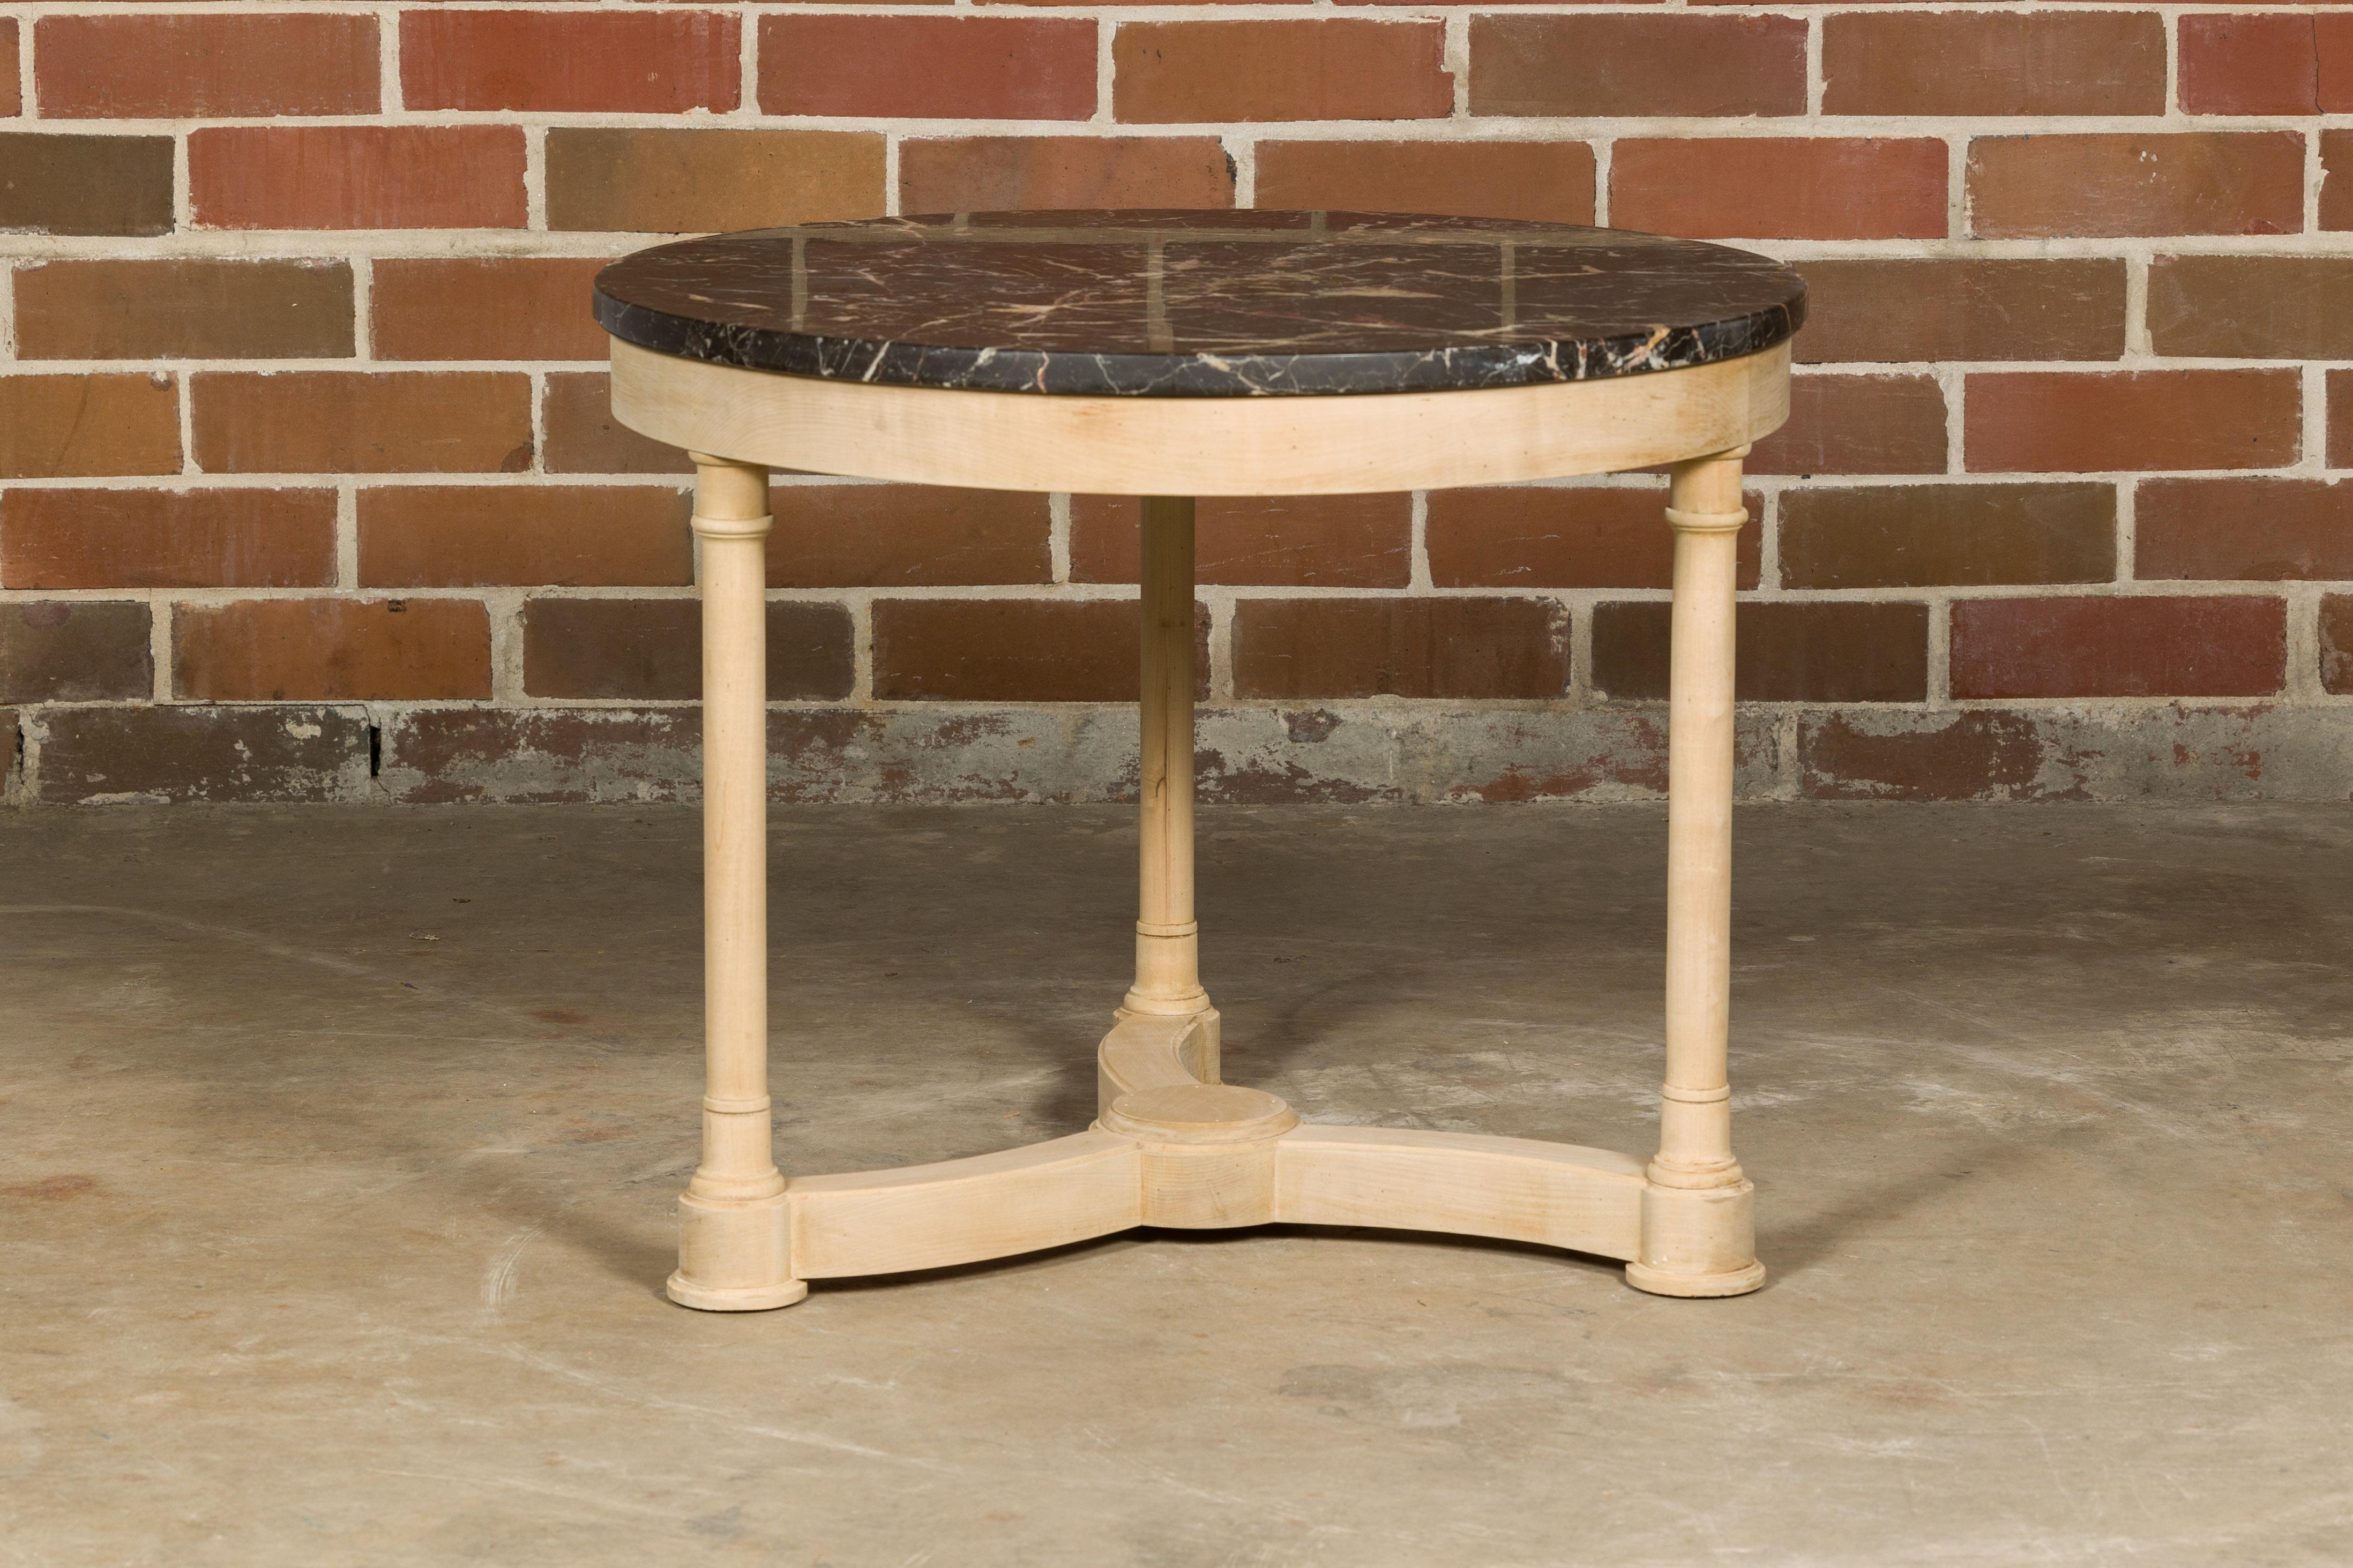 A French Empire style bleached walnut table from the 19th century with black veined circular marble top, three Doric column shaped legs and tripartite low stretcher. Evoke the grandeur of historical France with this immaculate 19th-century French